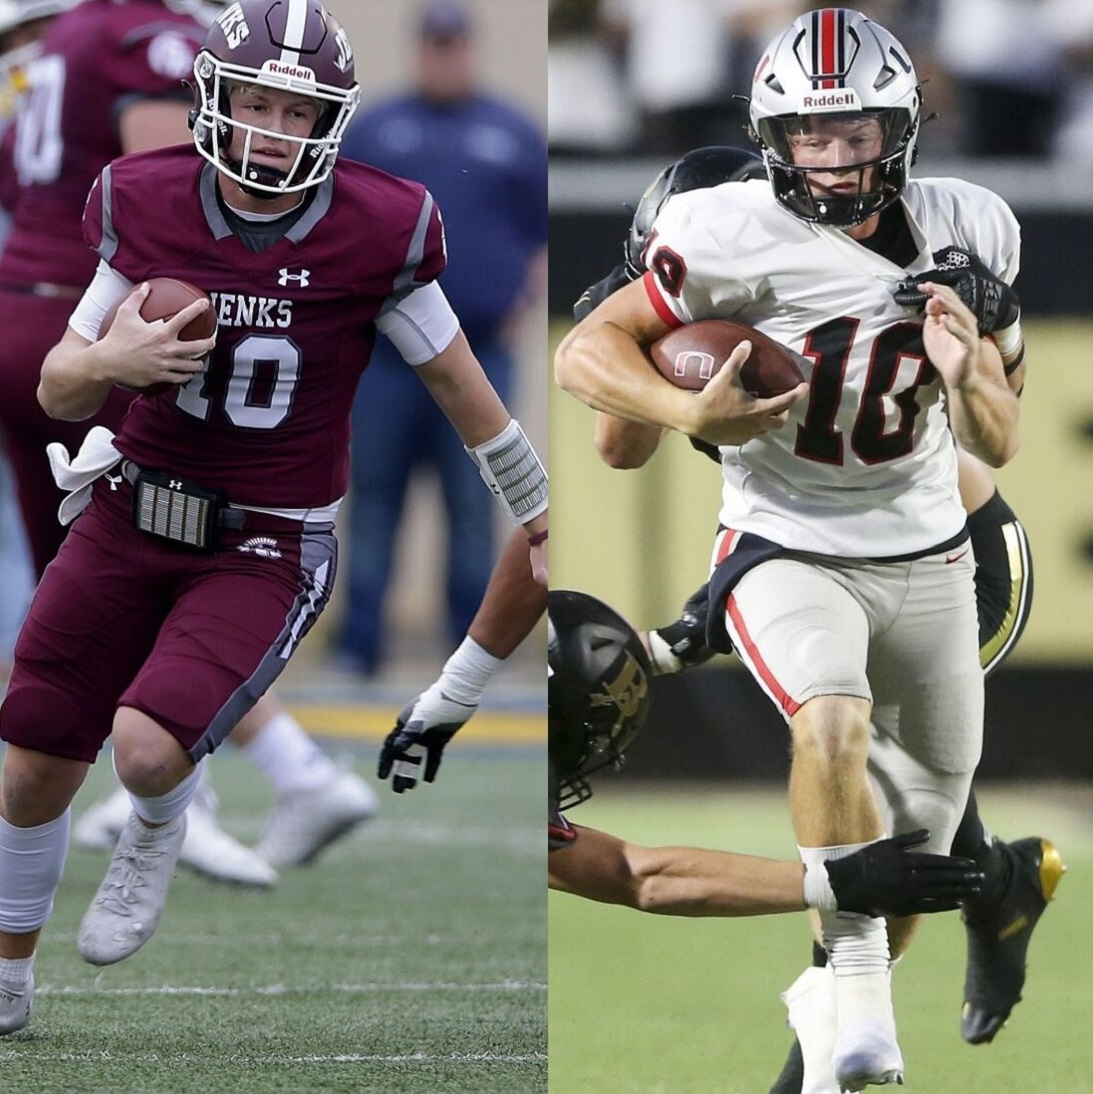 Week 2 rivalries led by Jenks-Union and QB factor